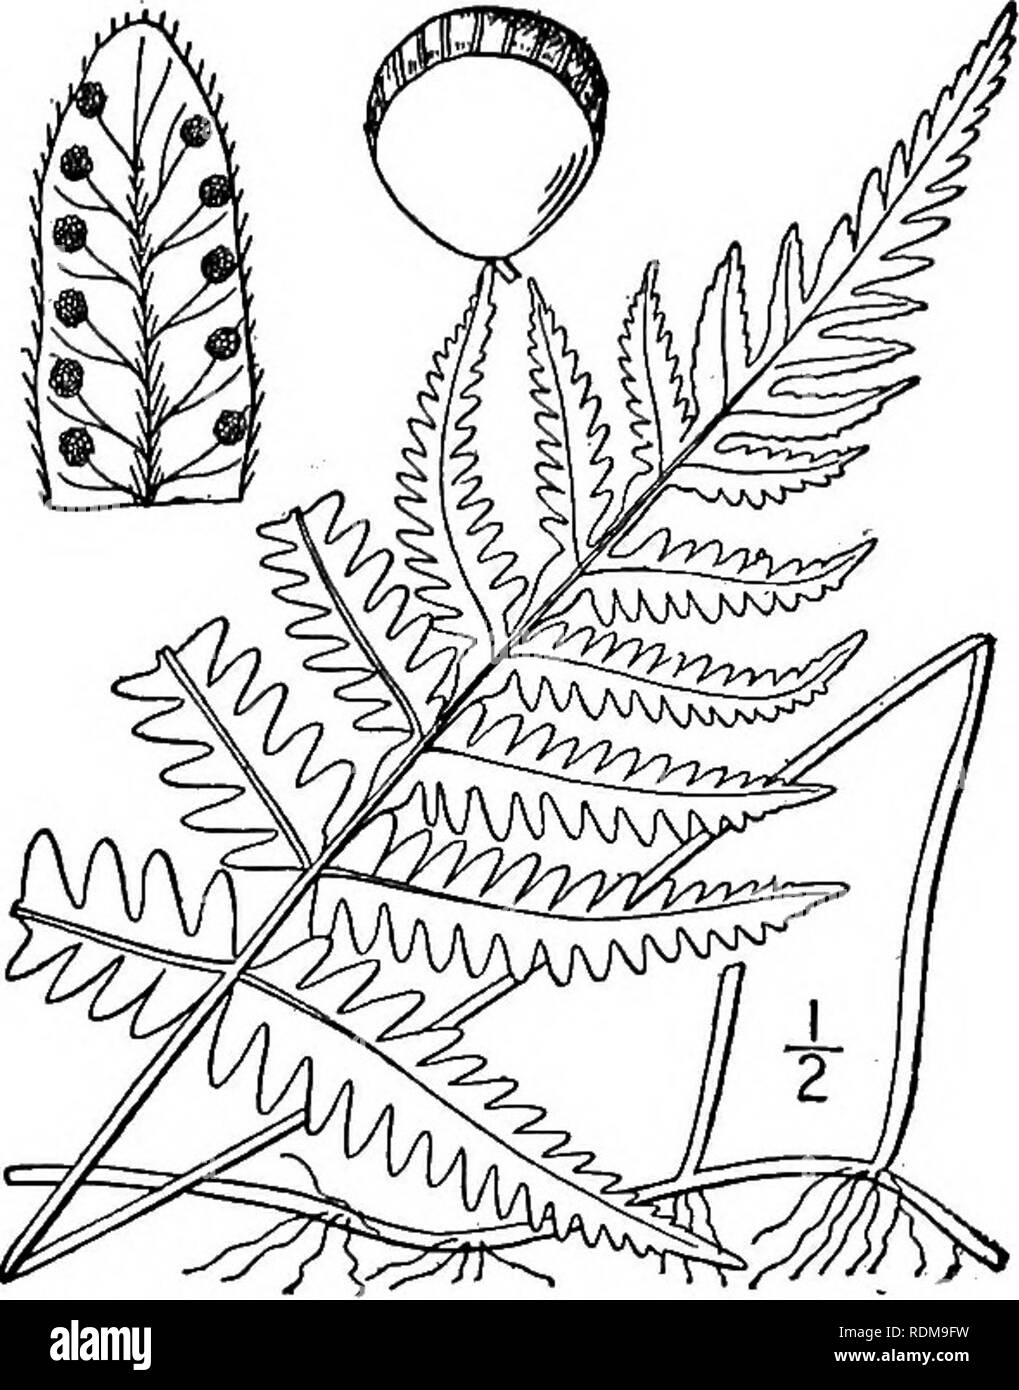 . An illustrated flora of the northern United States, Canada and the British possessions, from Newfoundland to the parallel of the southern boundary of Virginia, and from the Atlantic Ocean westward to the 102d meridian. Botany; Botany. Genus 7. FERN FAMILY. 23. 14. Dryopteris Phegopteris (L.) C. Chr. Long Beech-fern. Fig. 50. Polypodium Phegopteris L. Sp. PI. 1089. 1753. Phegopteris polypodioides Fee, Gen. Fil. 243. 1850-52. Phegopteris Phegopteris Underw.; Small, Bull. Torr. Club, 20: 462. 1893. Dryopteris Phegopteris C. Chr. Ind. Fil. 284. 1905. Rootstock slender, creeping, somewhat chaffy. Stock Photo